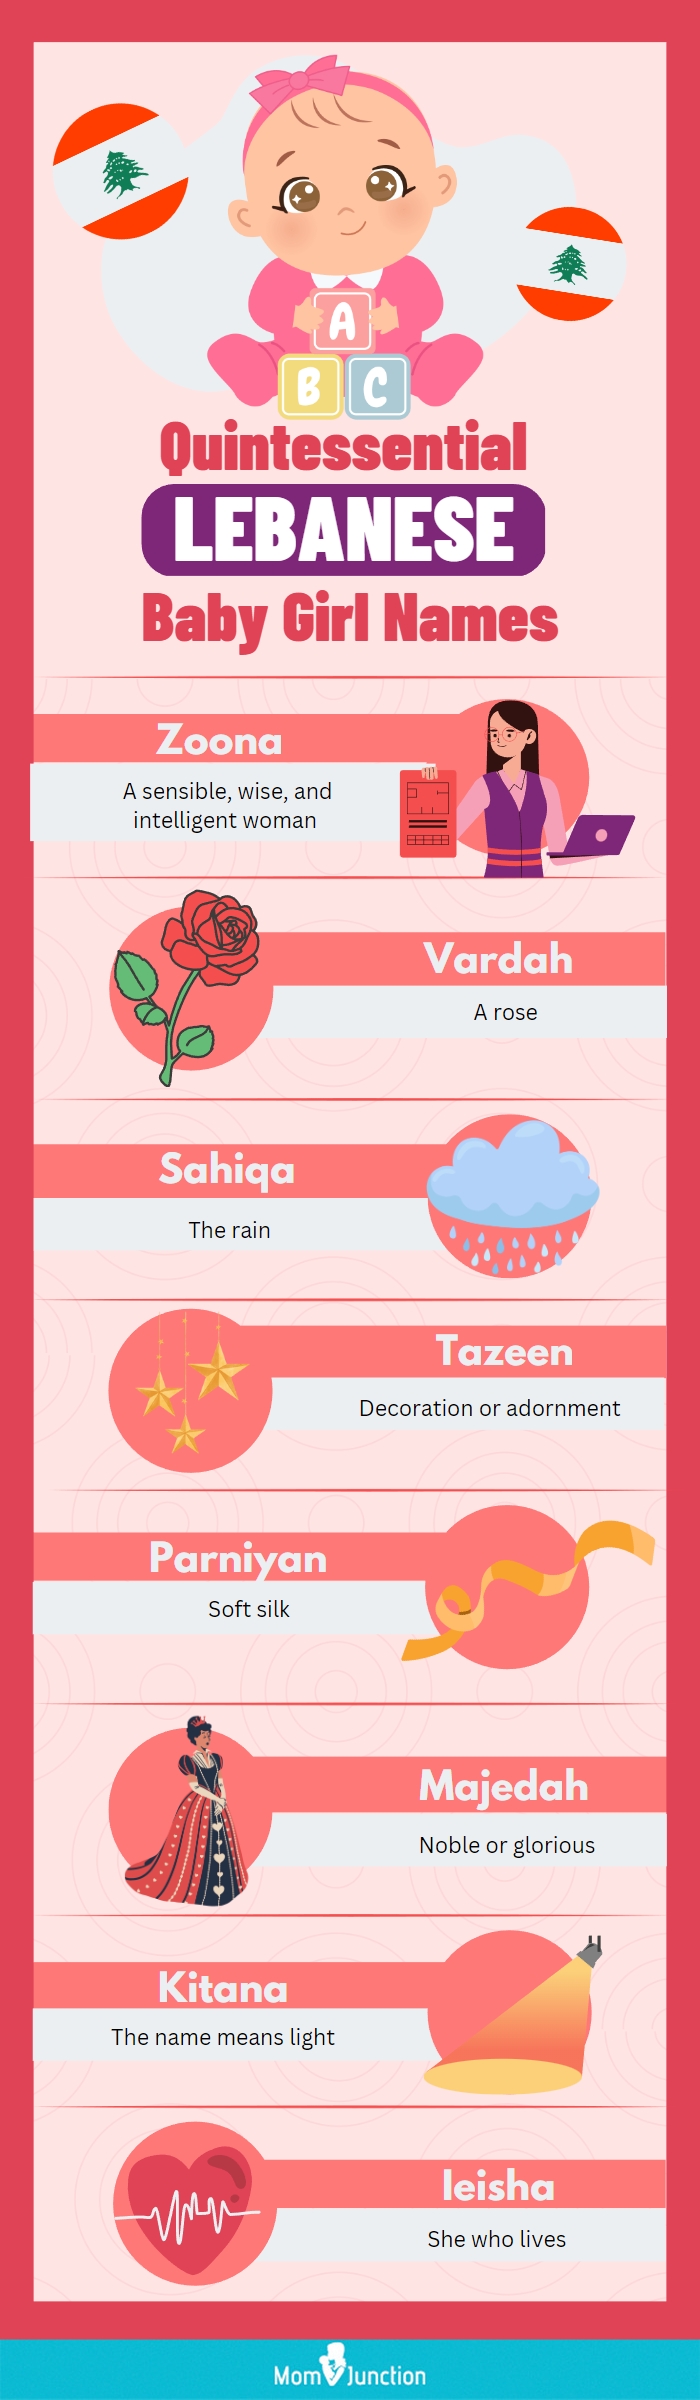 quintessential lebanese baby girl names (infographic)